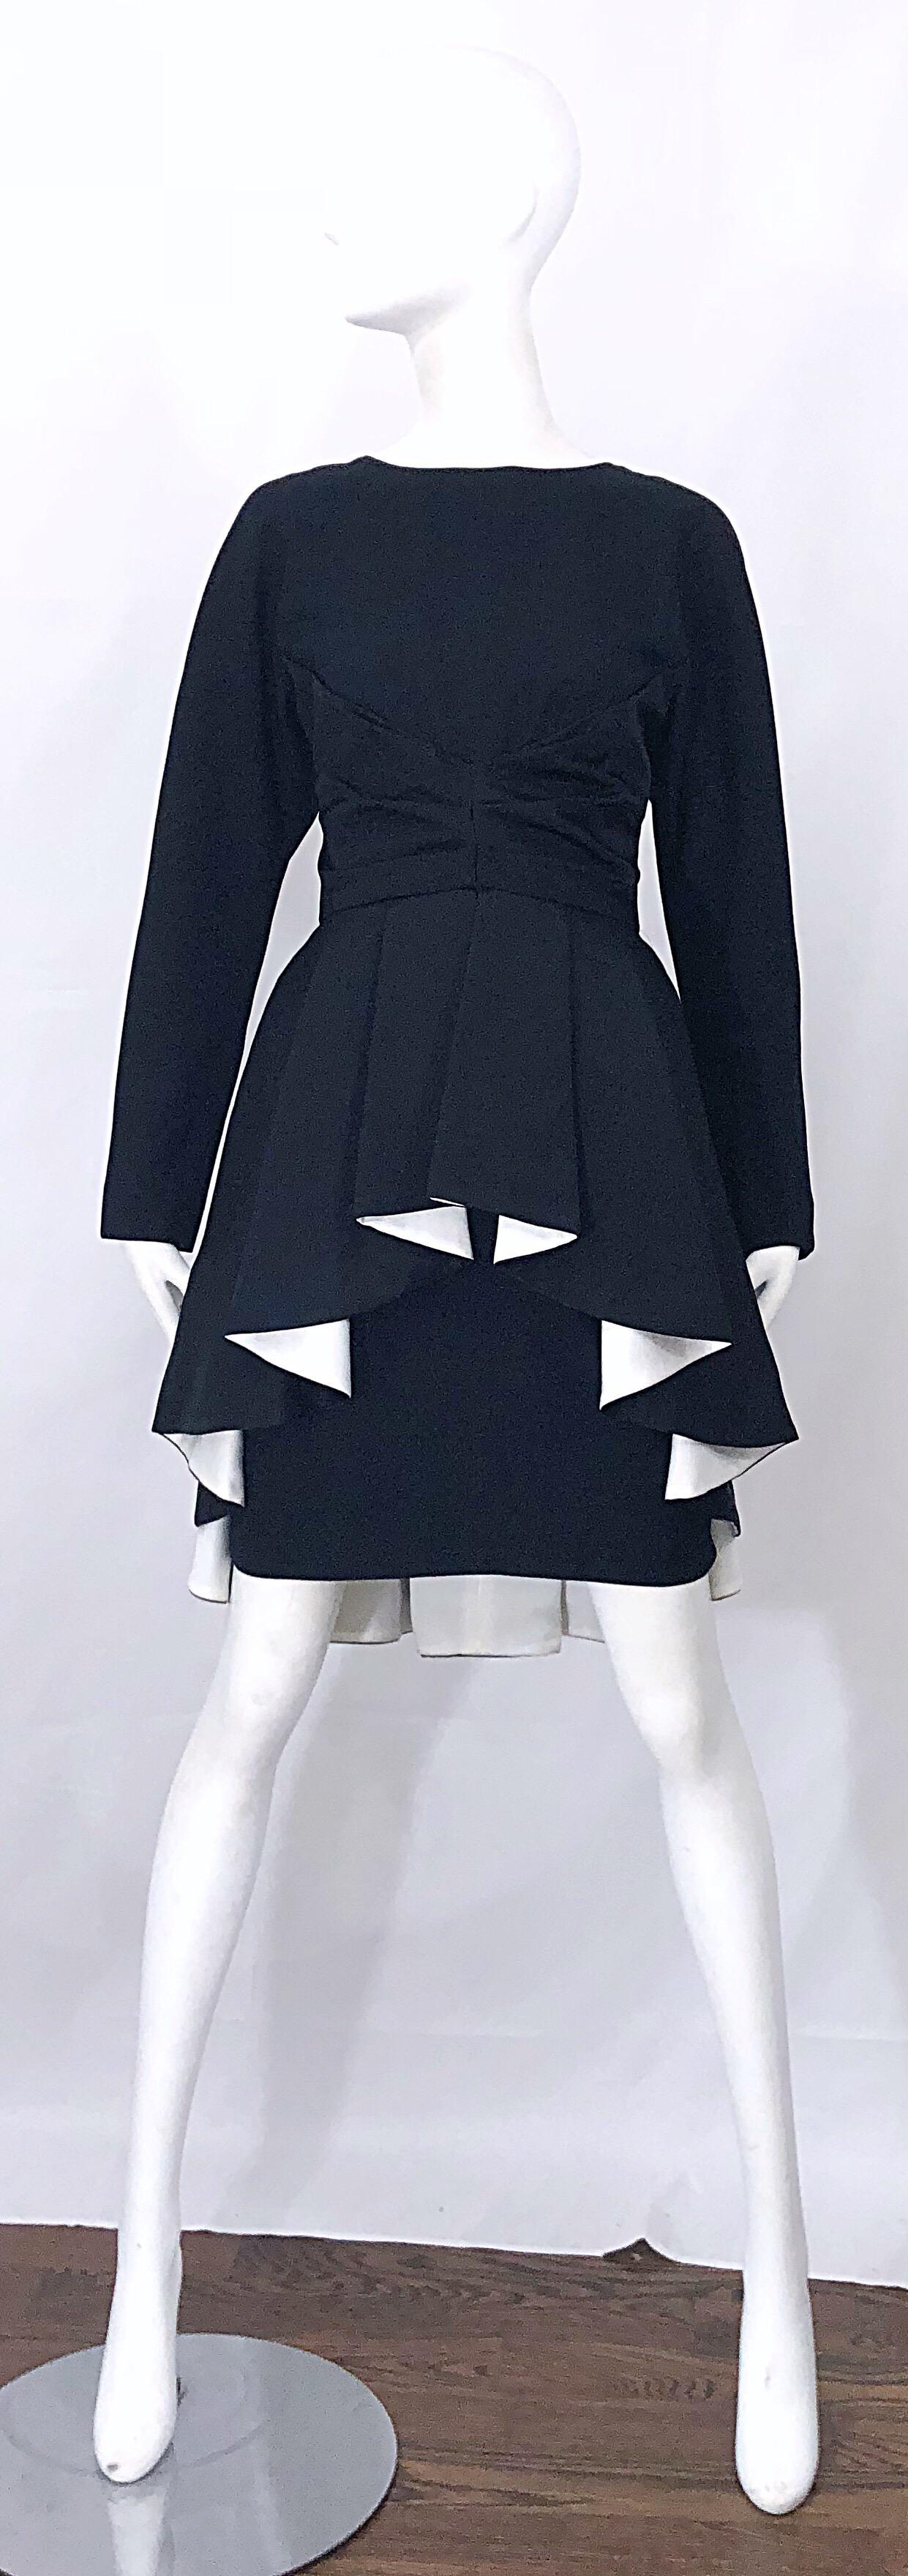 Rare early 1990s JOAN RAINES black and white Avant Garde long sleeve dress! Joan Raines was the daughter of famed designer Adele Simpson, and followed in her mother's footsteps in the late 80s / early 90s. 
This beauty features so much intricate